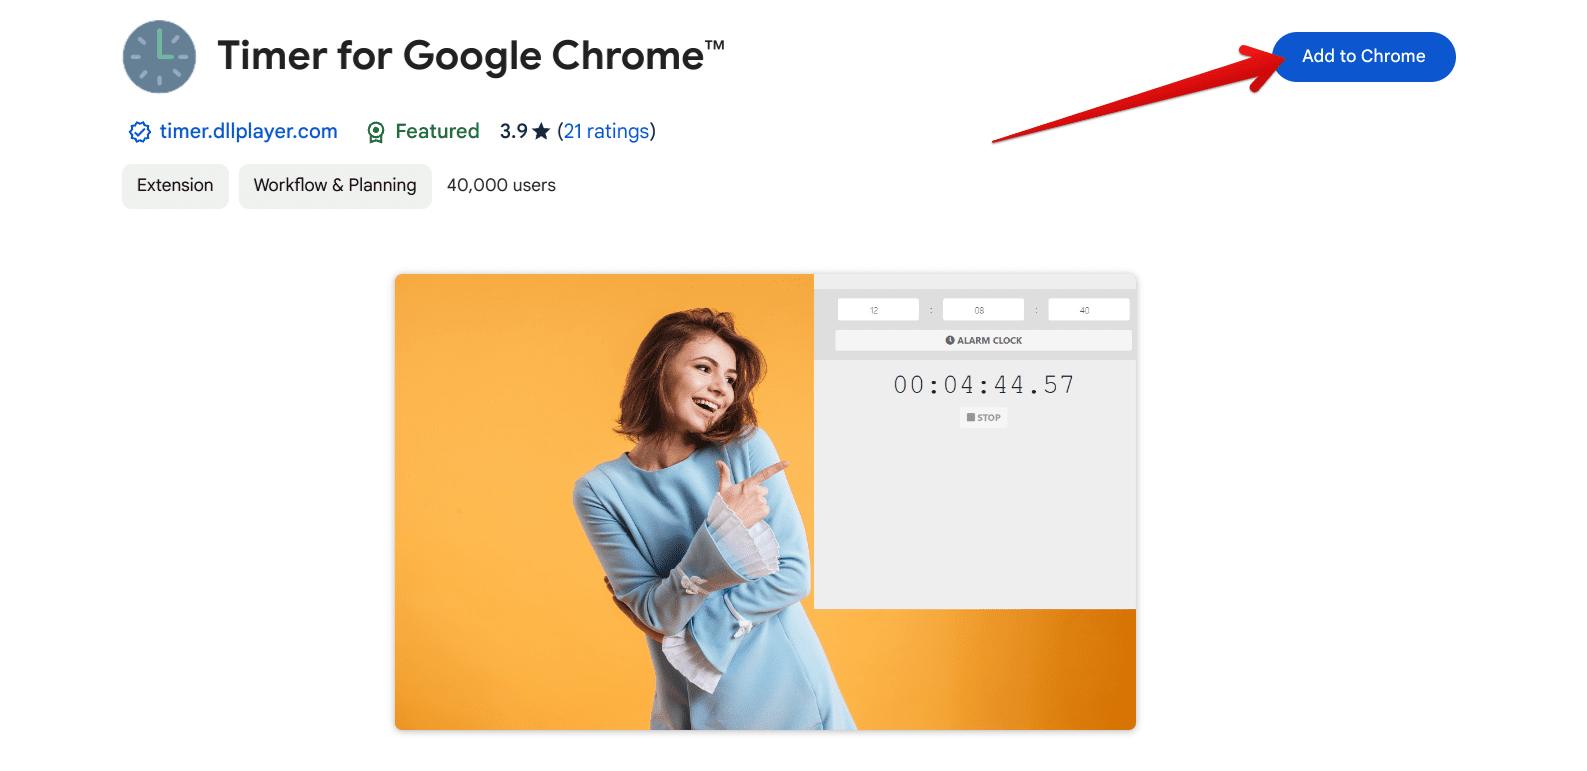 Adding the extension to Chrome